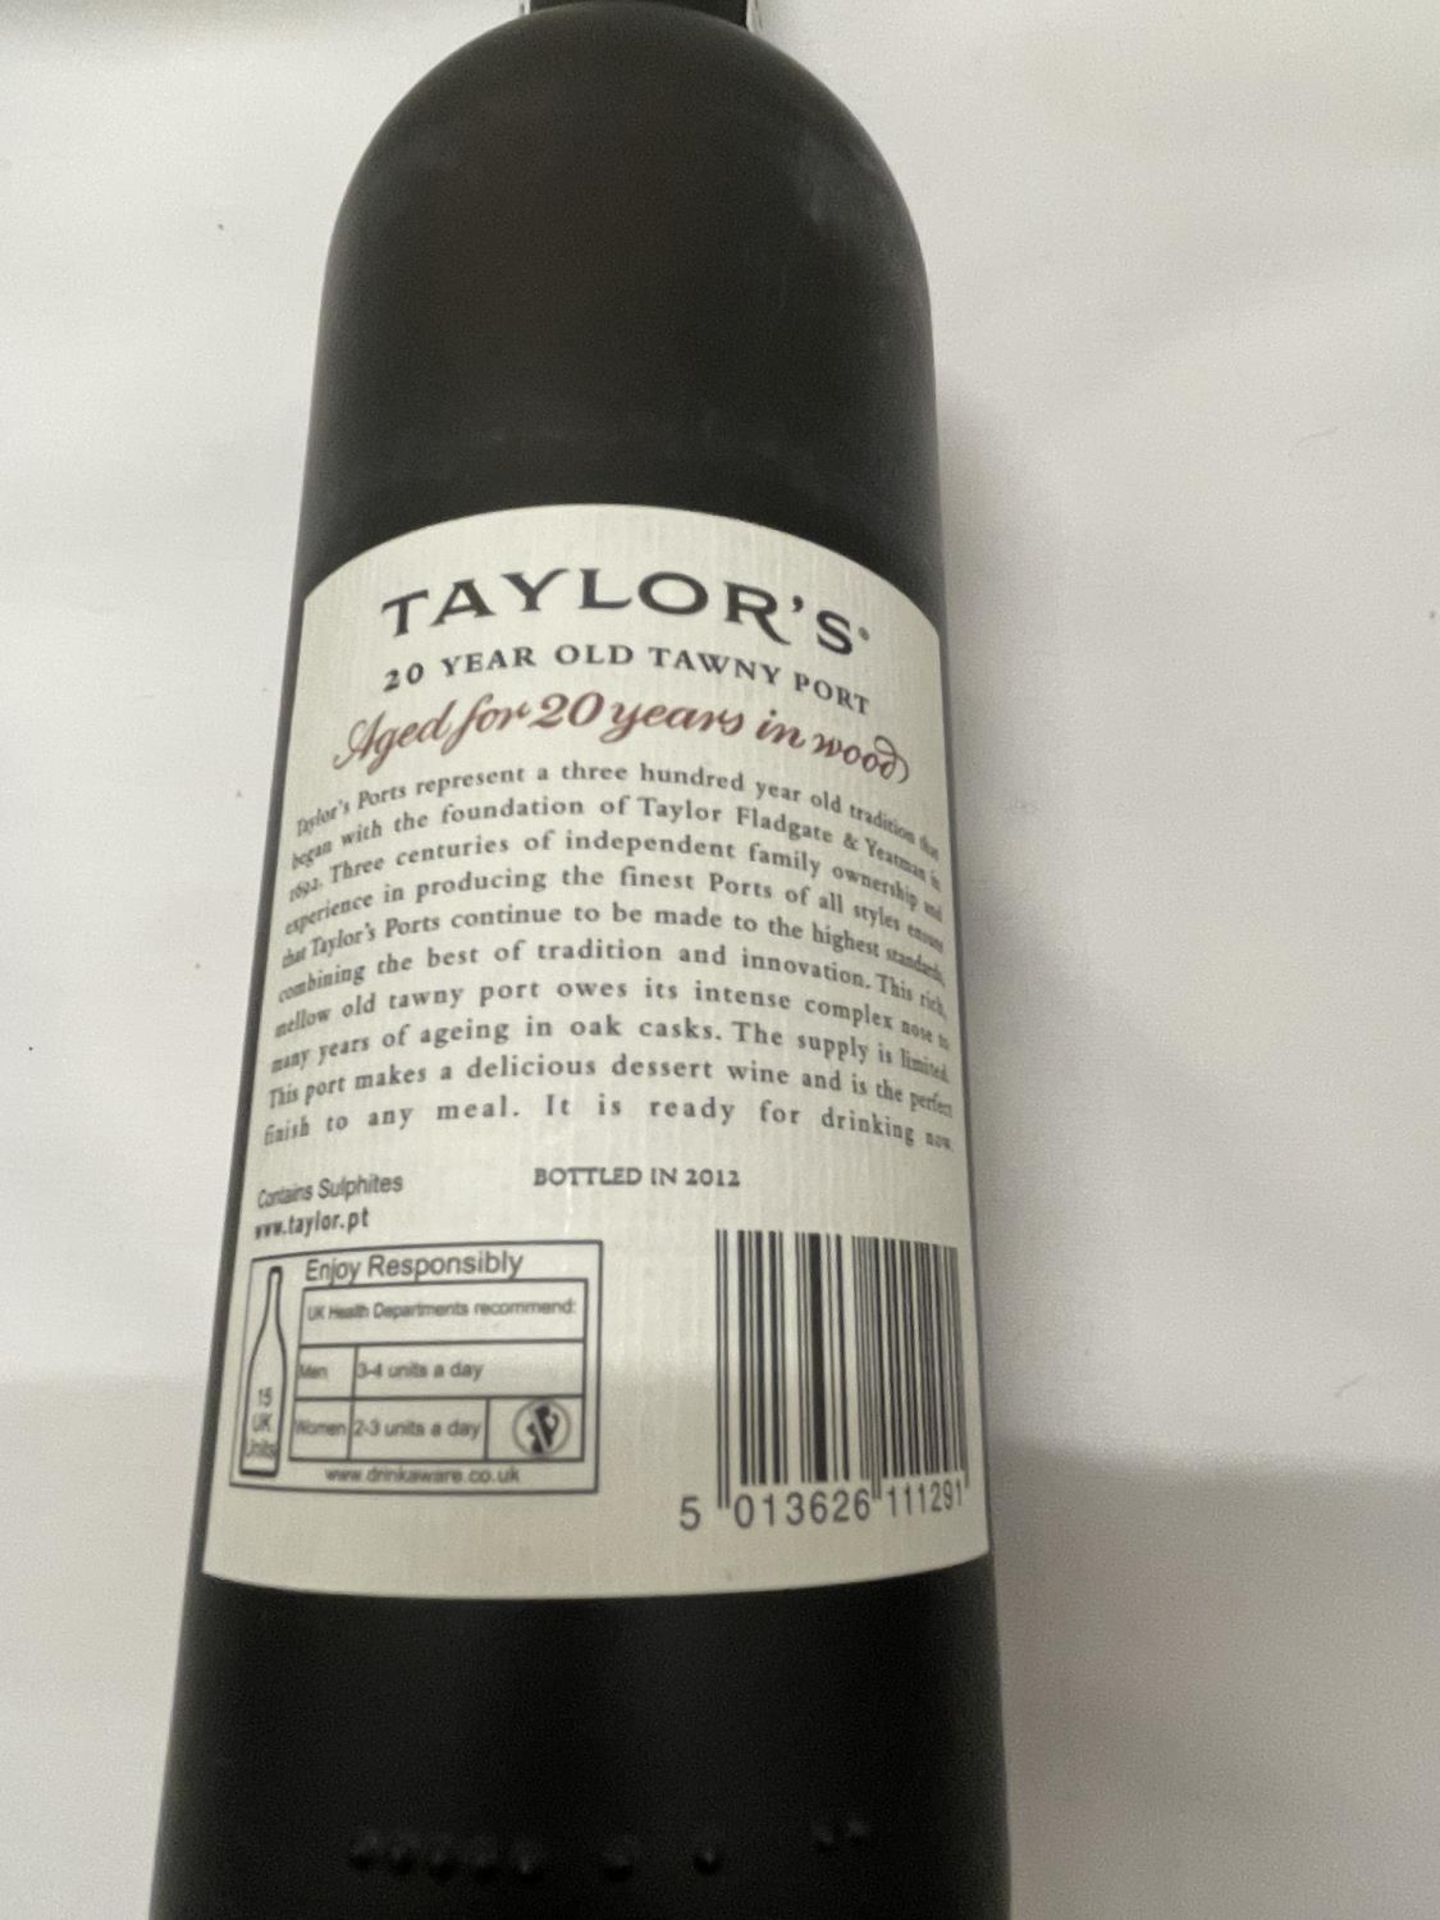 A BOXED 75CL TAYLORS 20 YEAR OLD TAWNY PORT AGED FOR 20 YEARS IN WOOD STORED IN A CONSTANT - Image 4 of 5